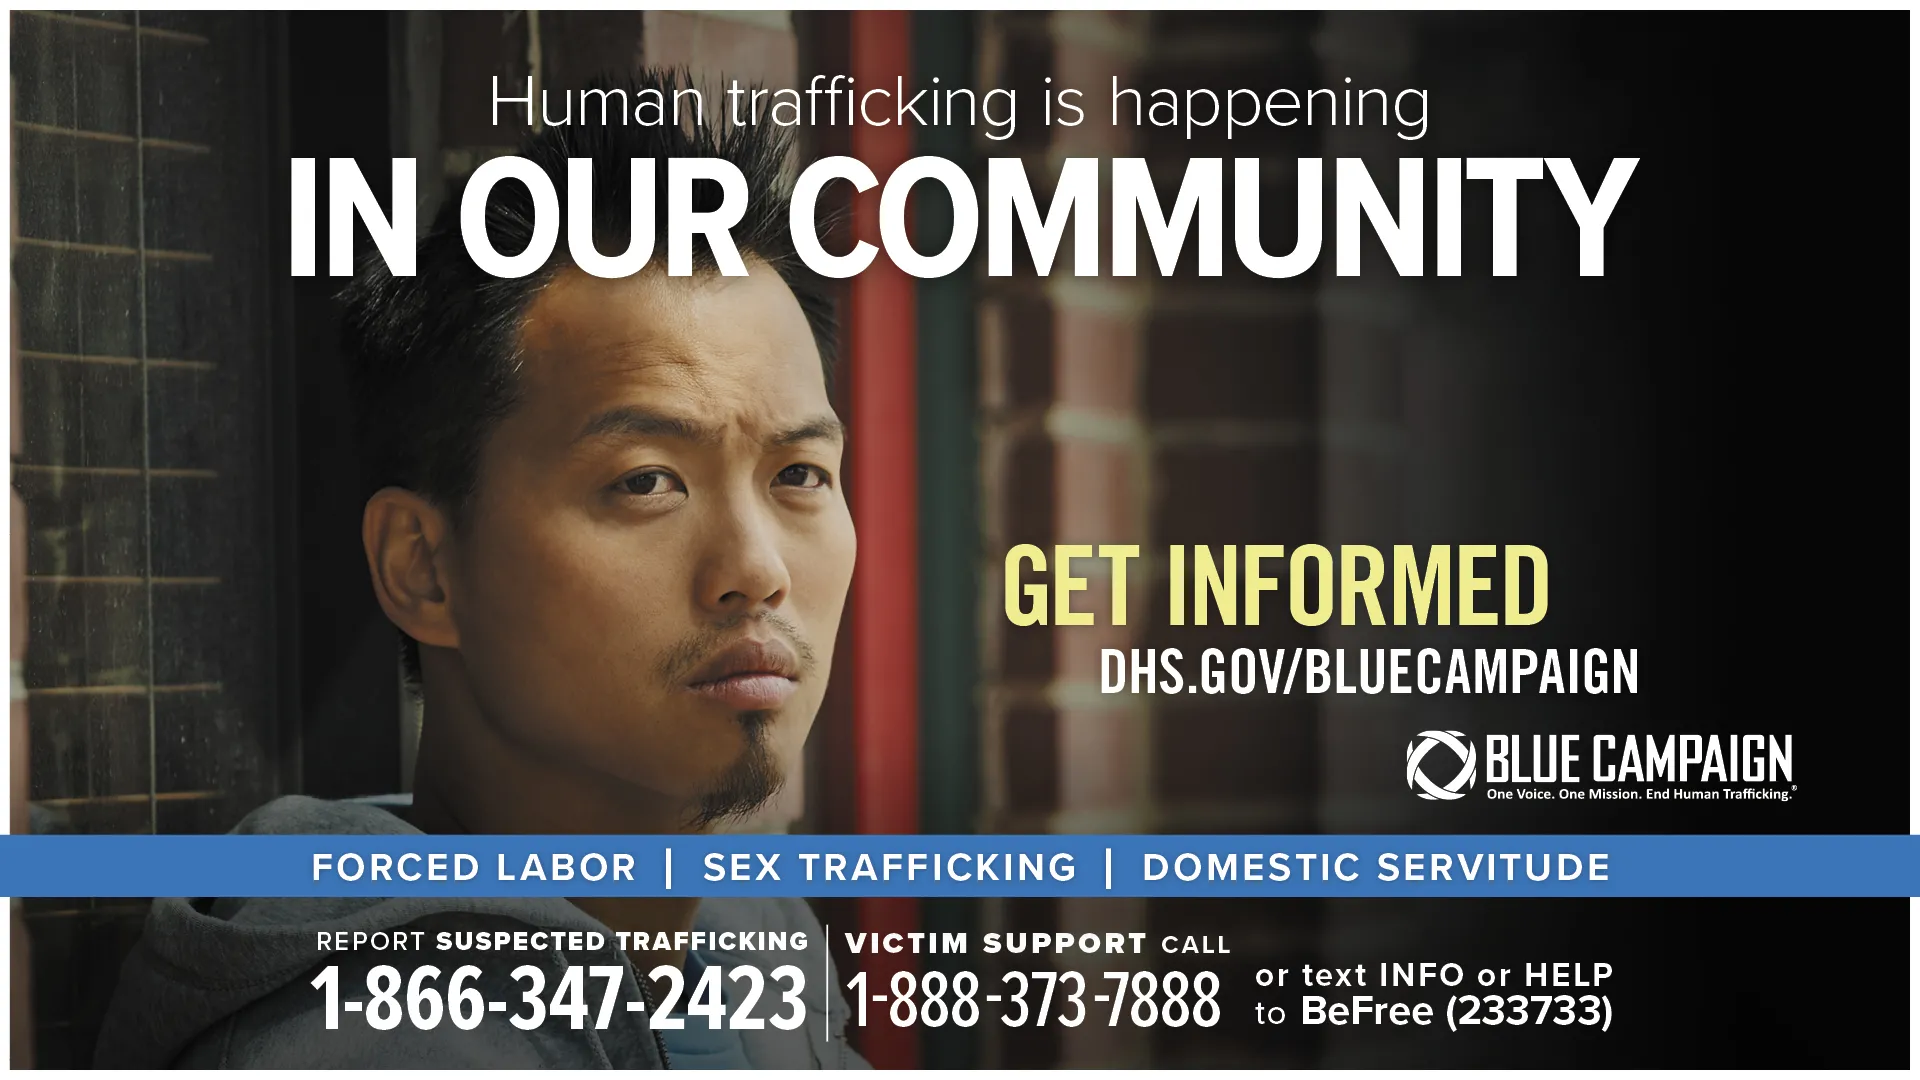 This poster shows a young Asian man in front of a brick wall looking past the camera with a neutral expression with the text “Human trafficking is happening in our community. Get informed. DHS.gov/BlueCampaign. Forced Labor, Sex Trafficking, Domestic Servitude. Report suspected trafficking: 1-866-347-2423. Victim support call: 1-888-373-7888 or text INFO or HELP to BeFree (233733).”